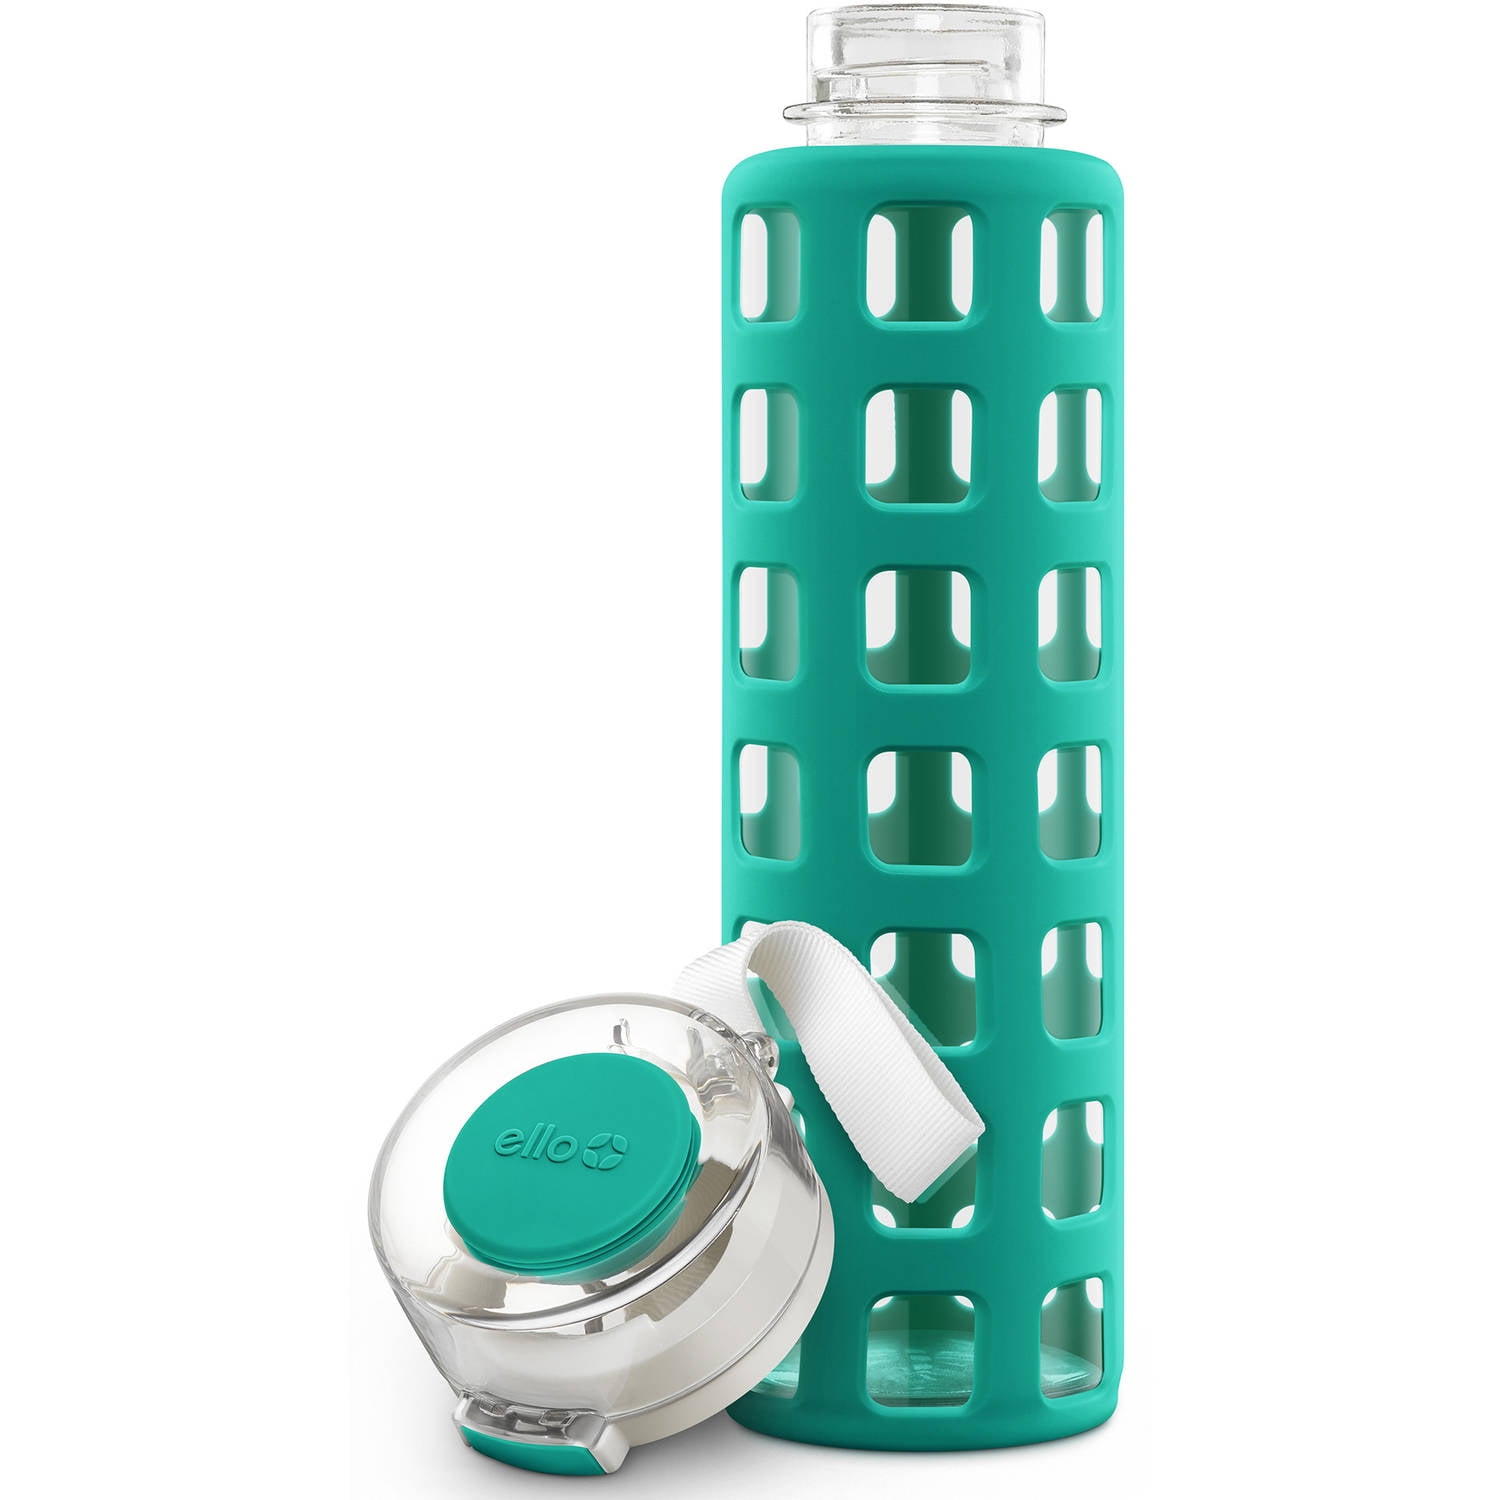 Ello Products - Cue water bottle envy. Thrive Glass Bottle with